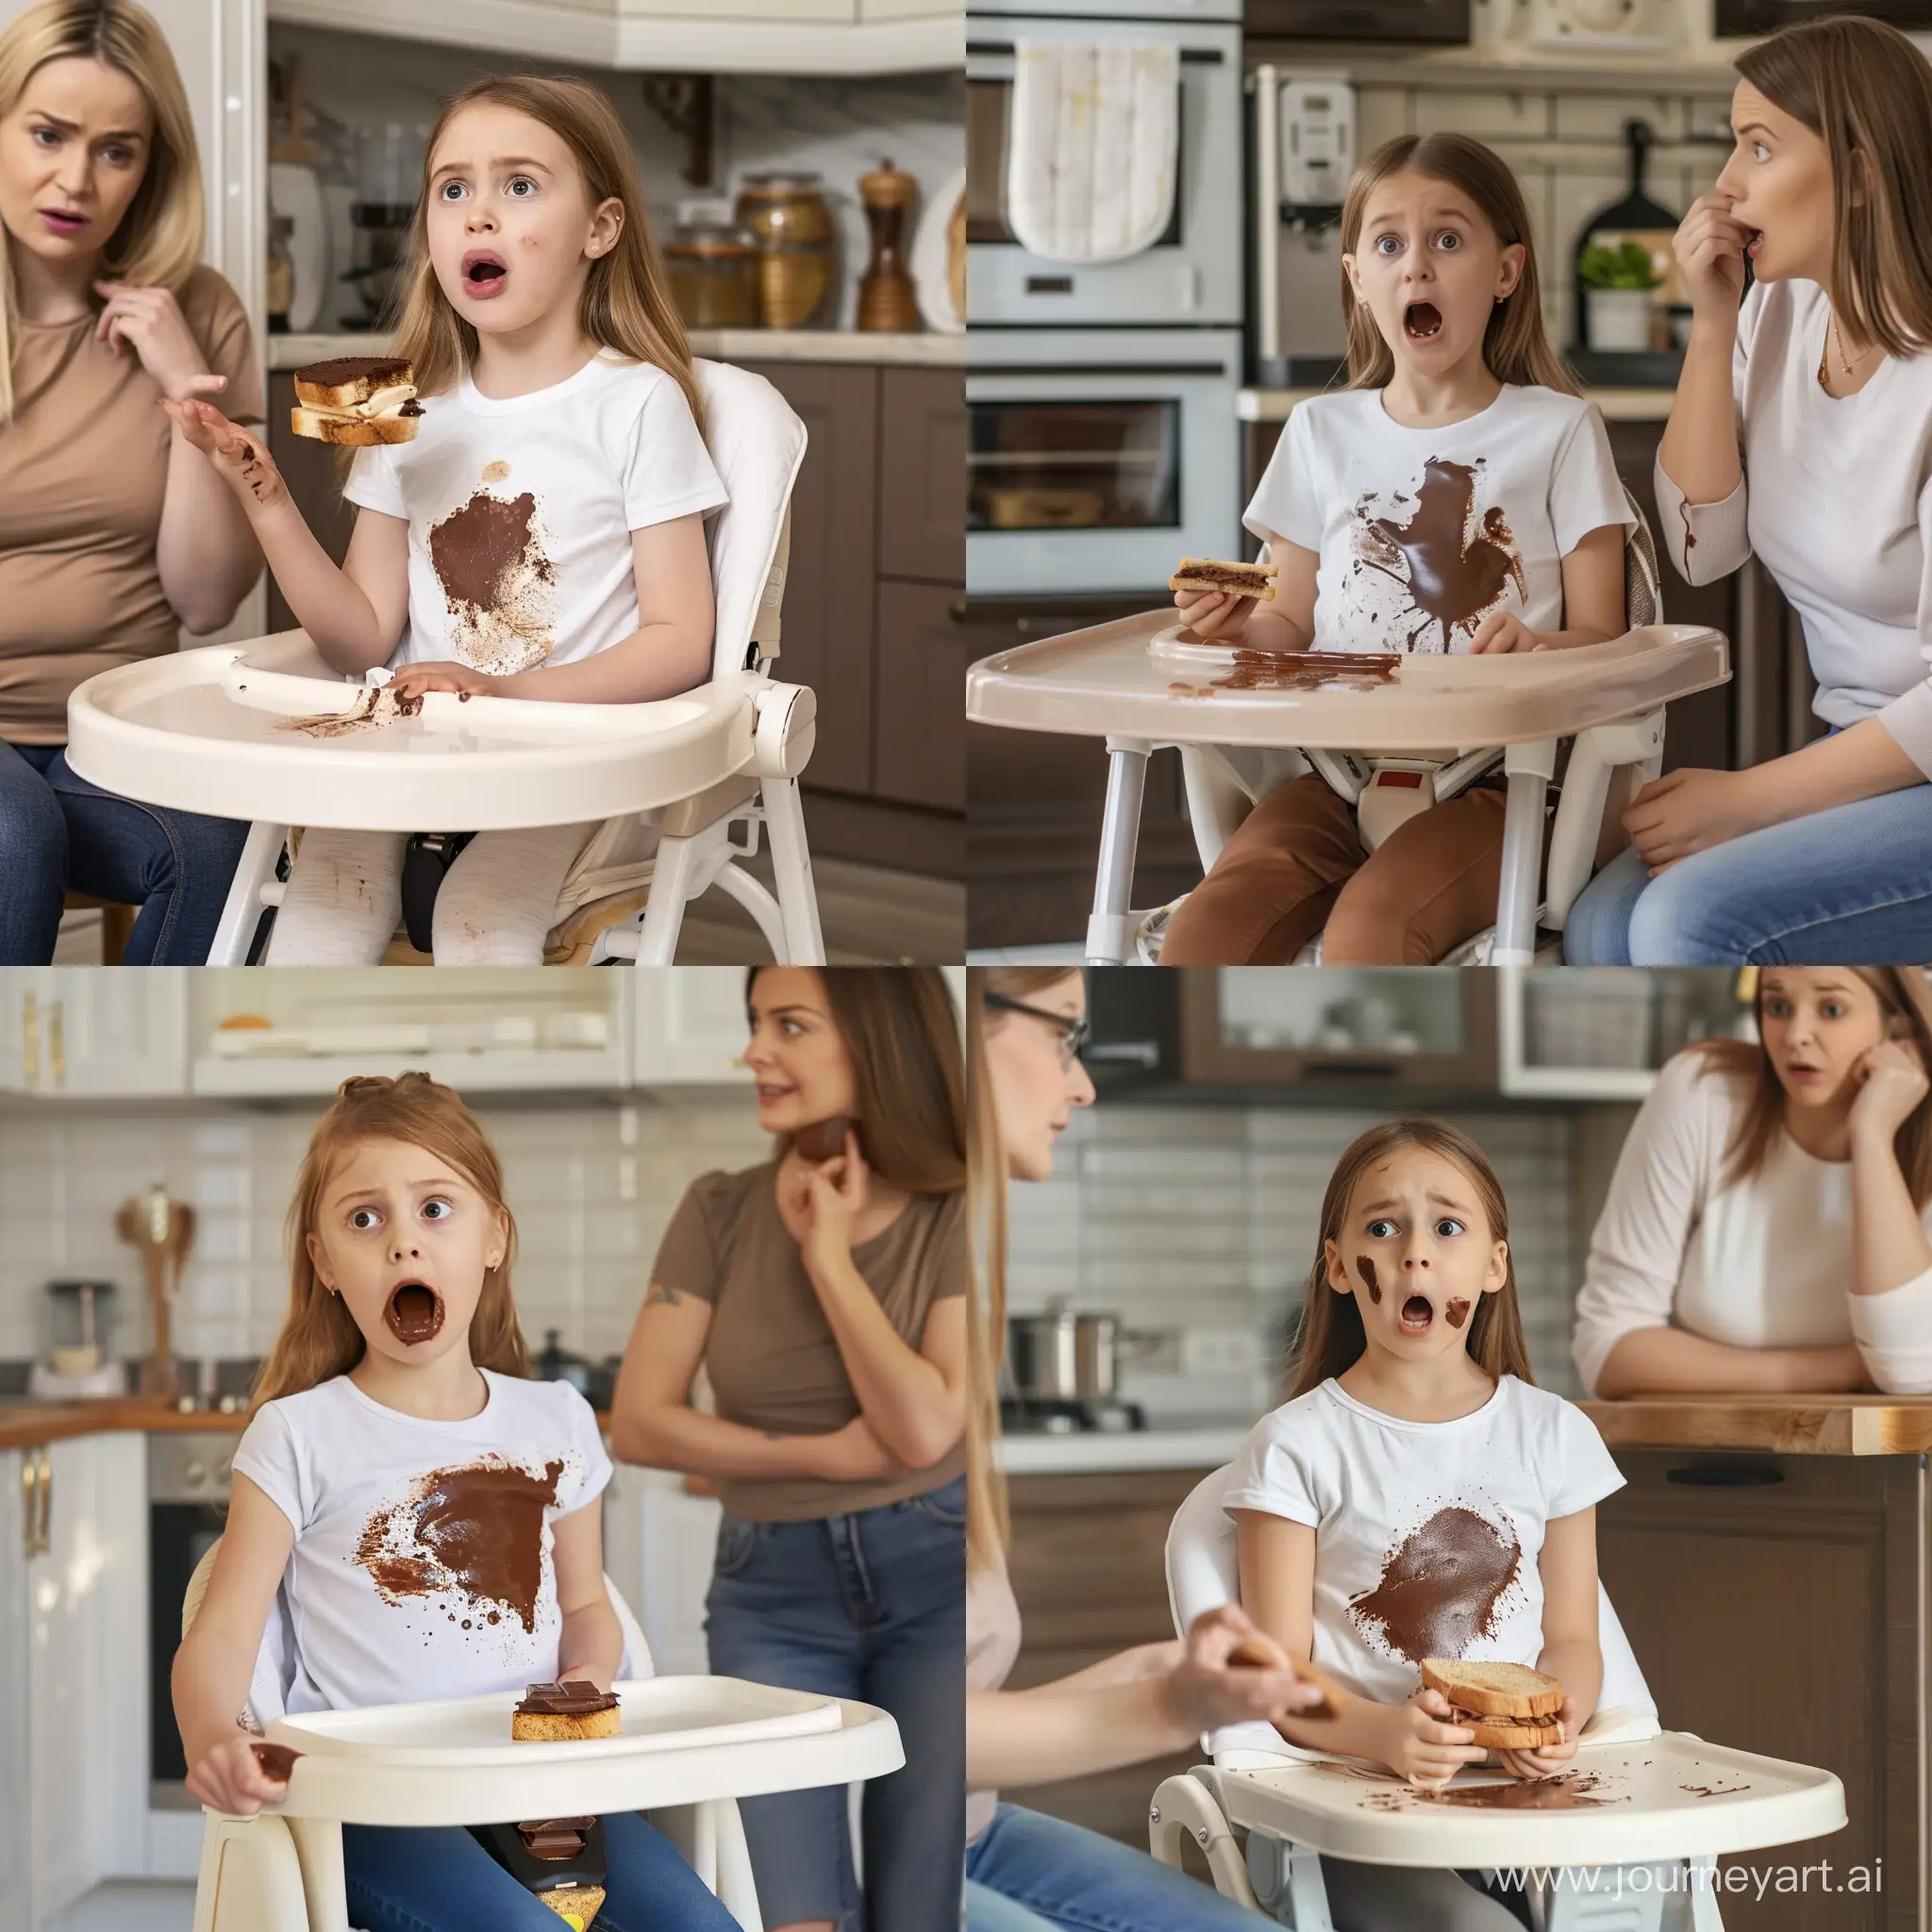 Surprised-Girl-with-Chocolate-Stain-Kitchen-Moment-with-Mother